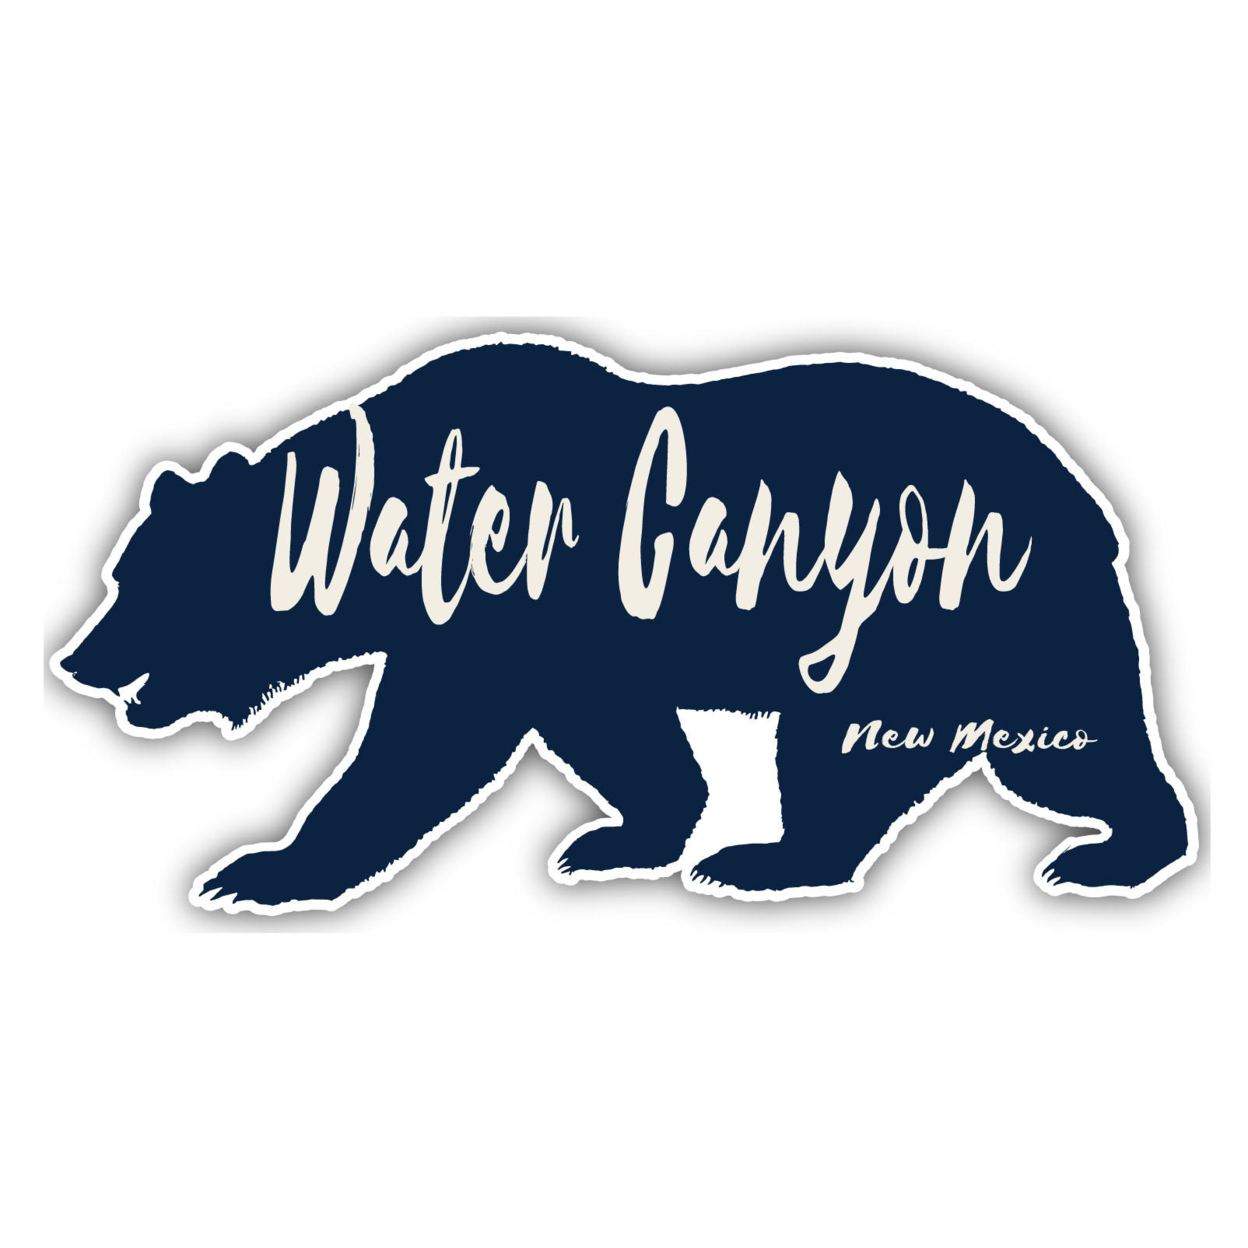 Water Canyon New Mexico Souvenir Decorative Stickers (Choose Theme And Size) - Single Unit, 4-Inch, Bear